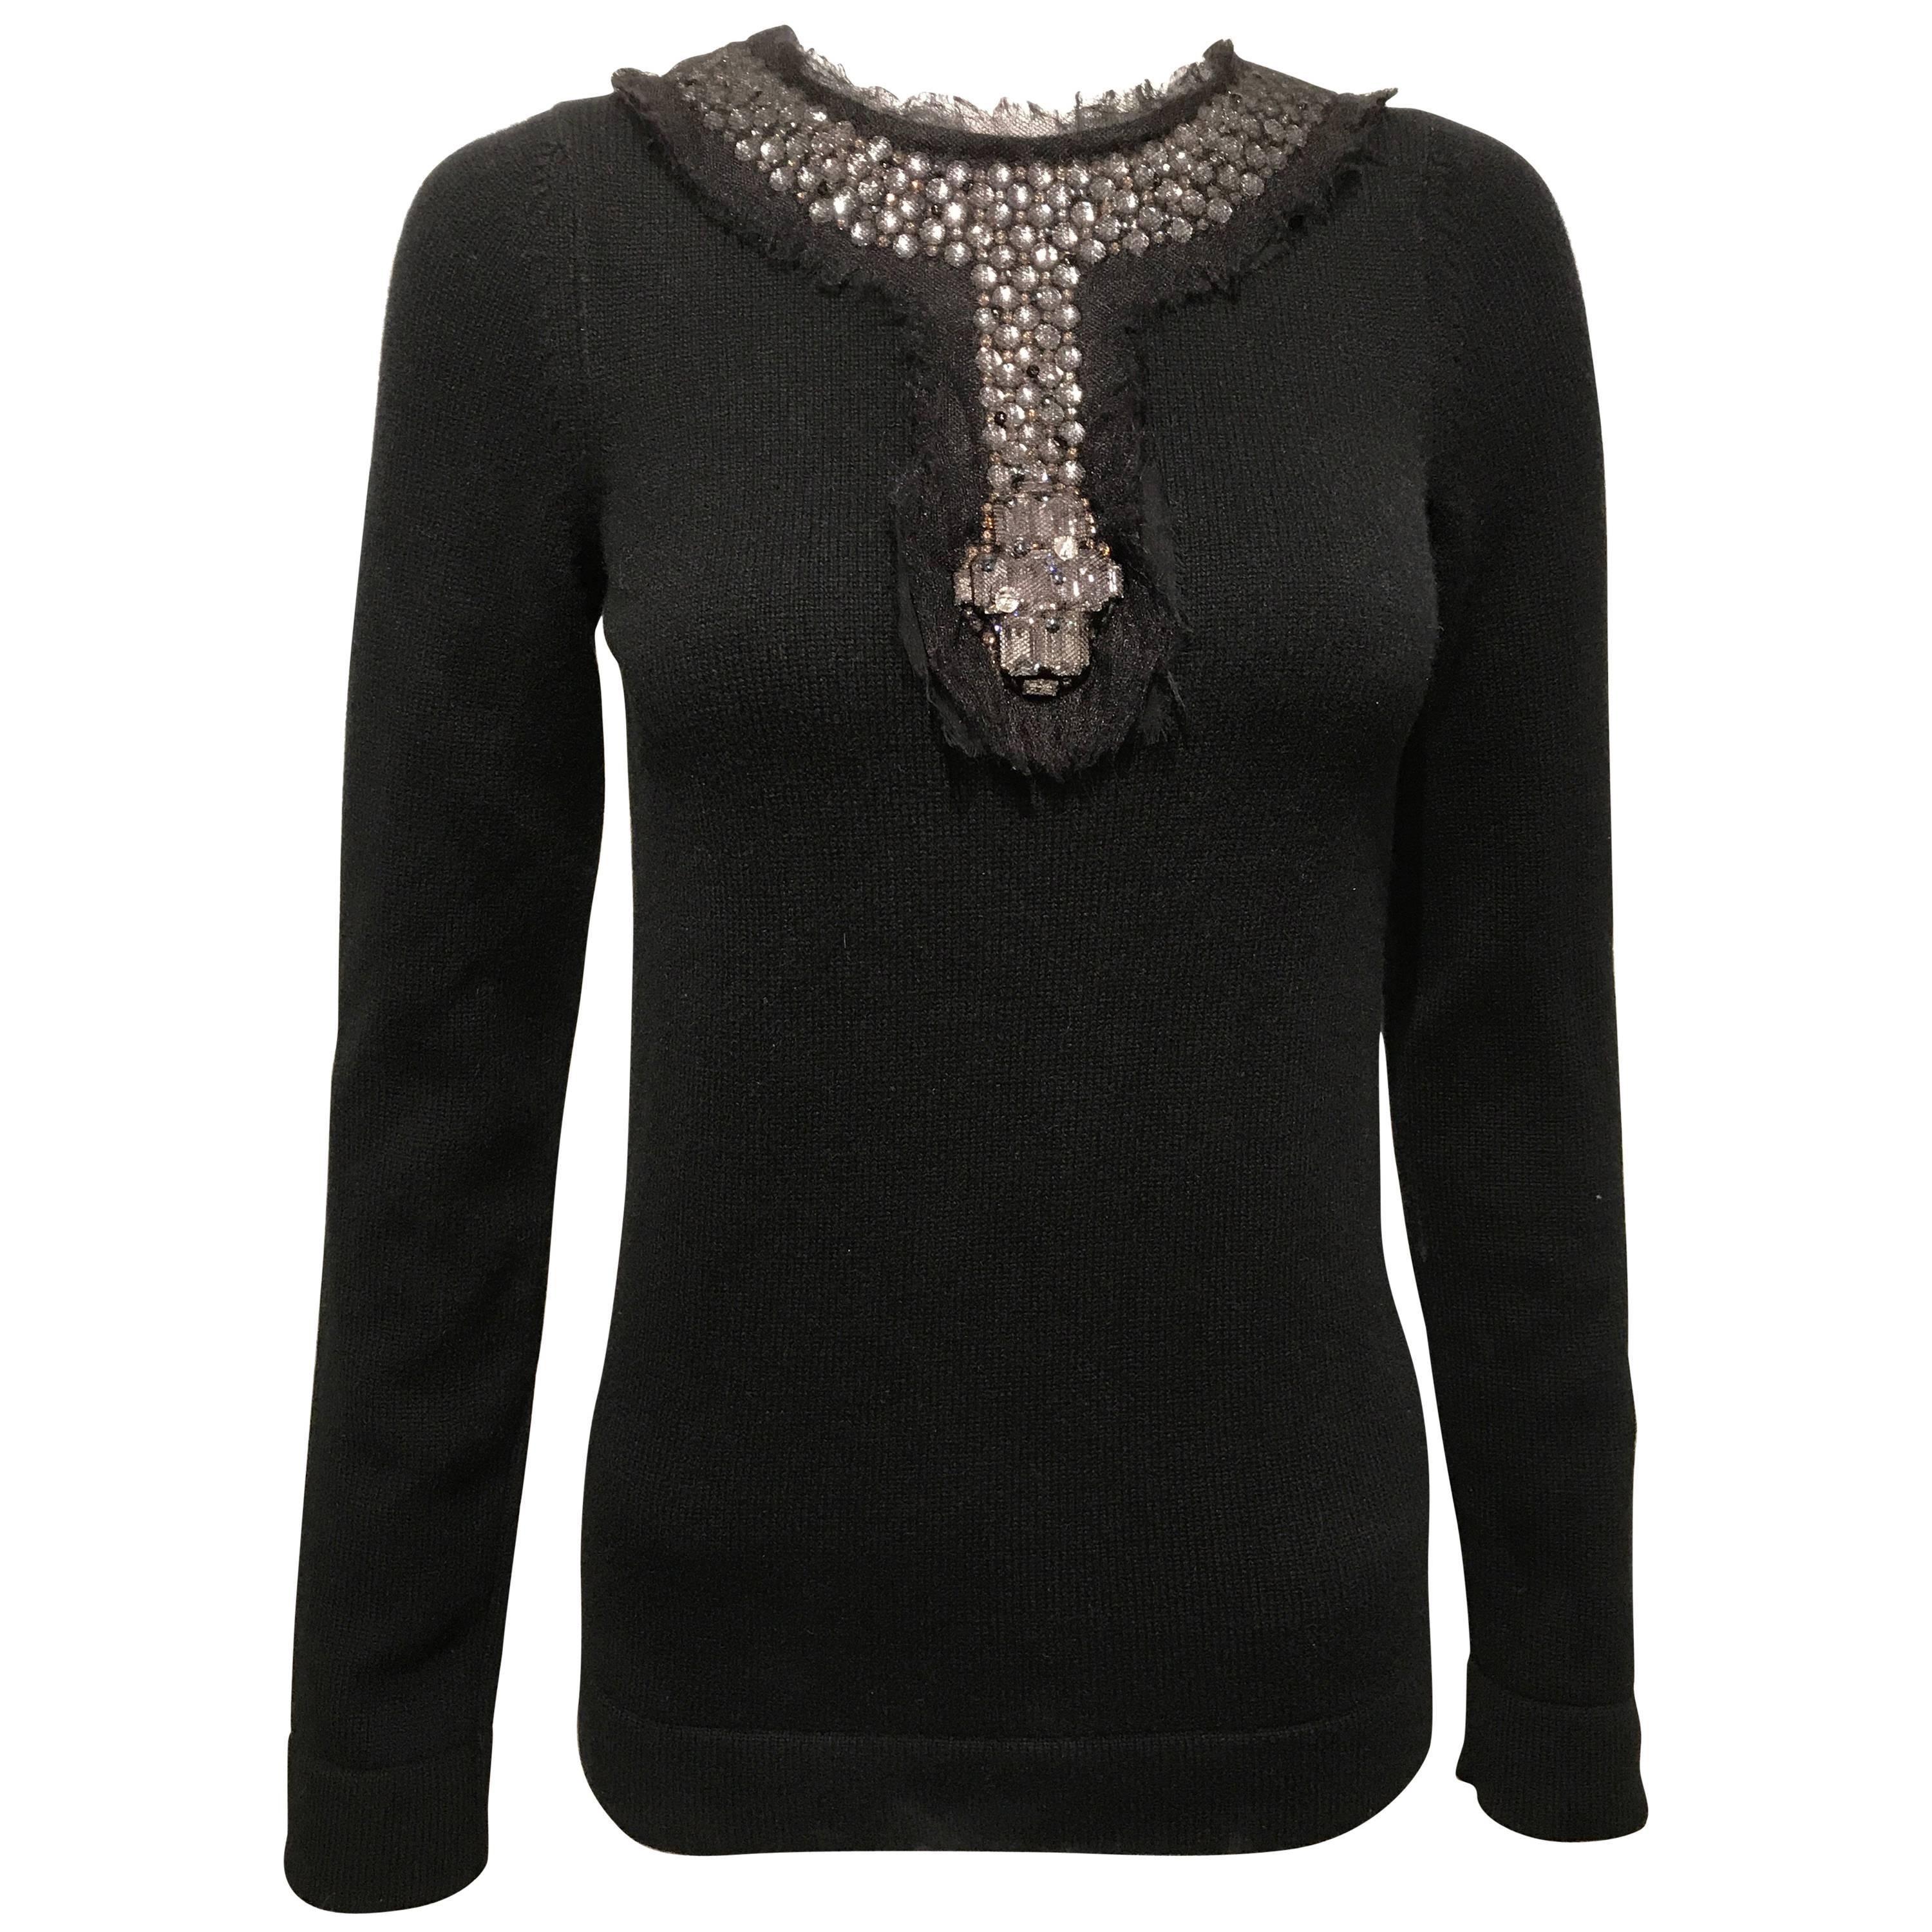 Chanel Black Cashmere Sweater With Jeweled Neckline Sz36 (Us4) For Sale